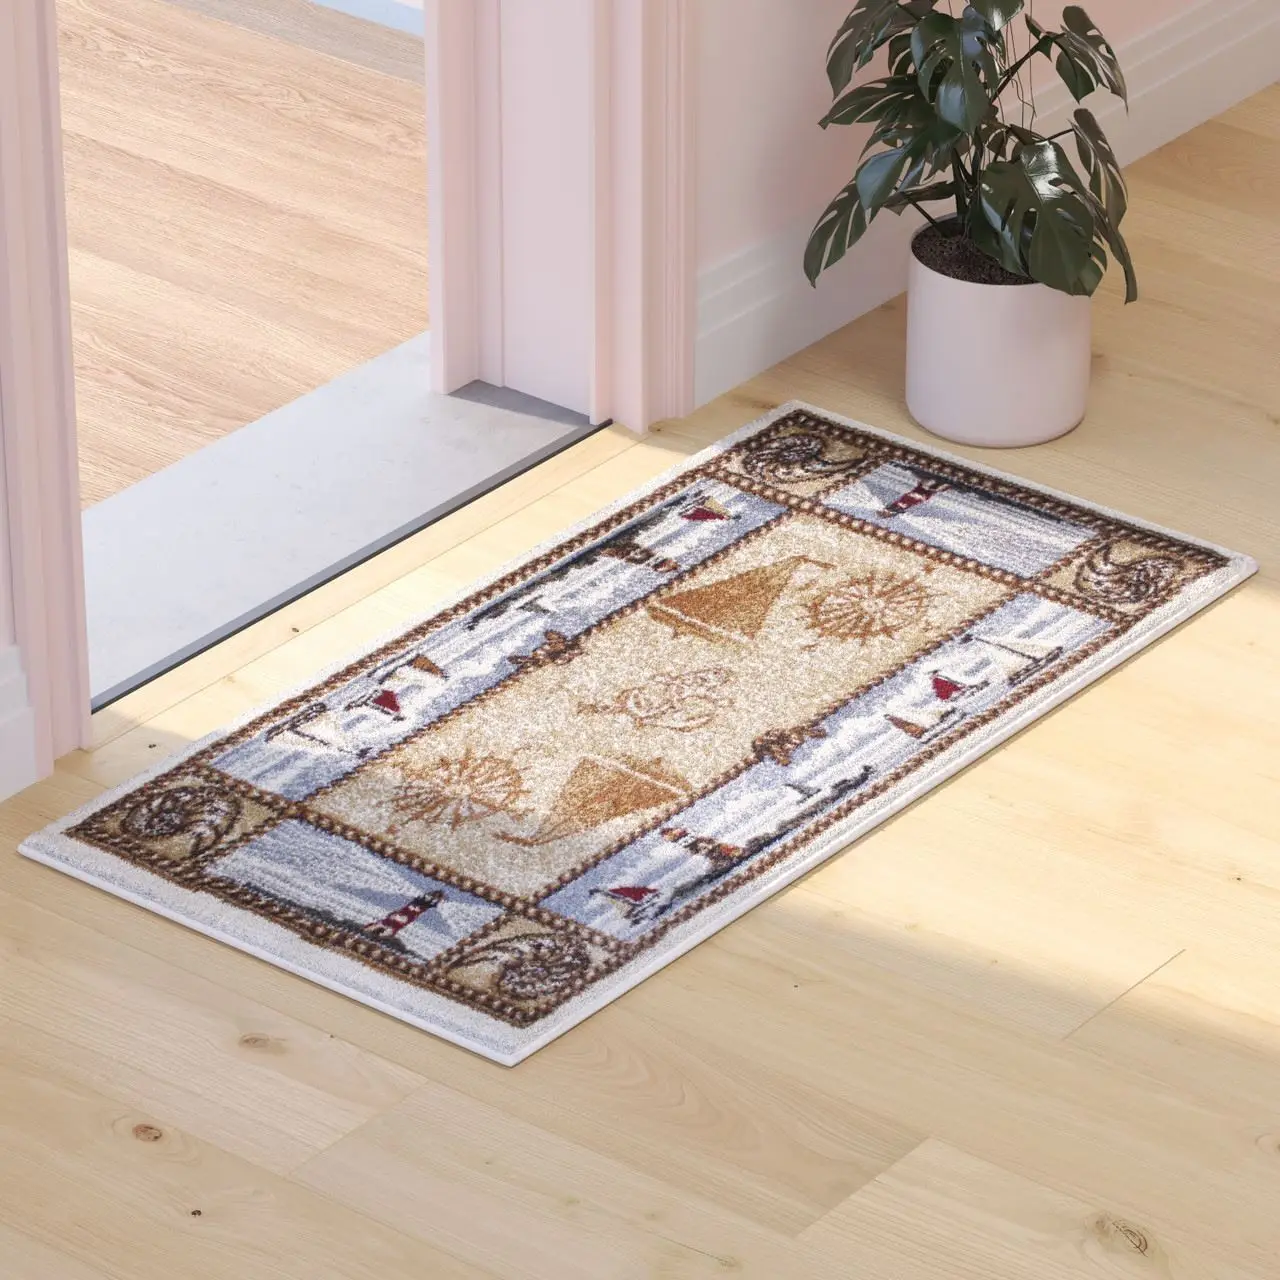 

Carpets for Living Room Beige Nautical Themed 2' X 3' Area Rug with Jute Backing for Rugs for Bedroom